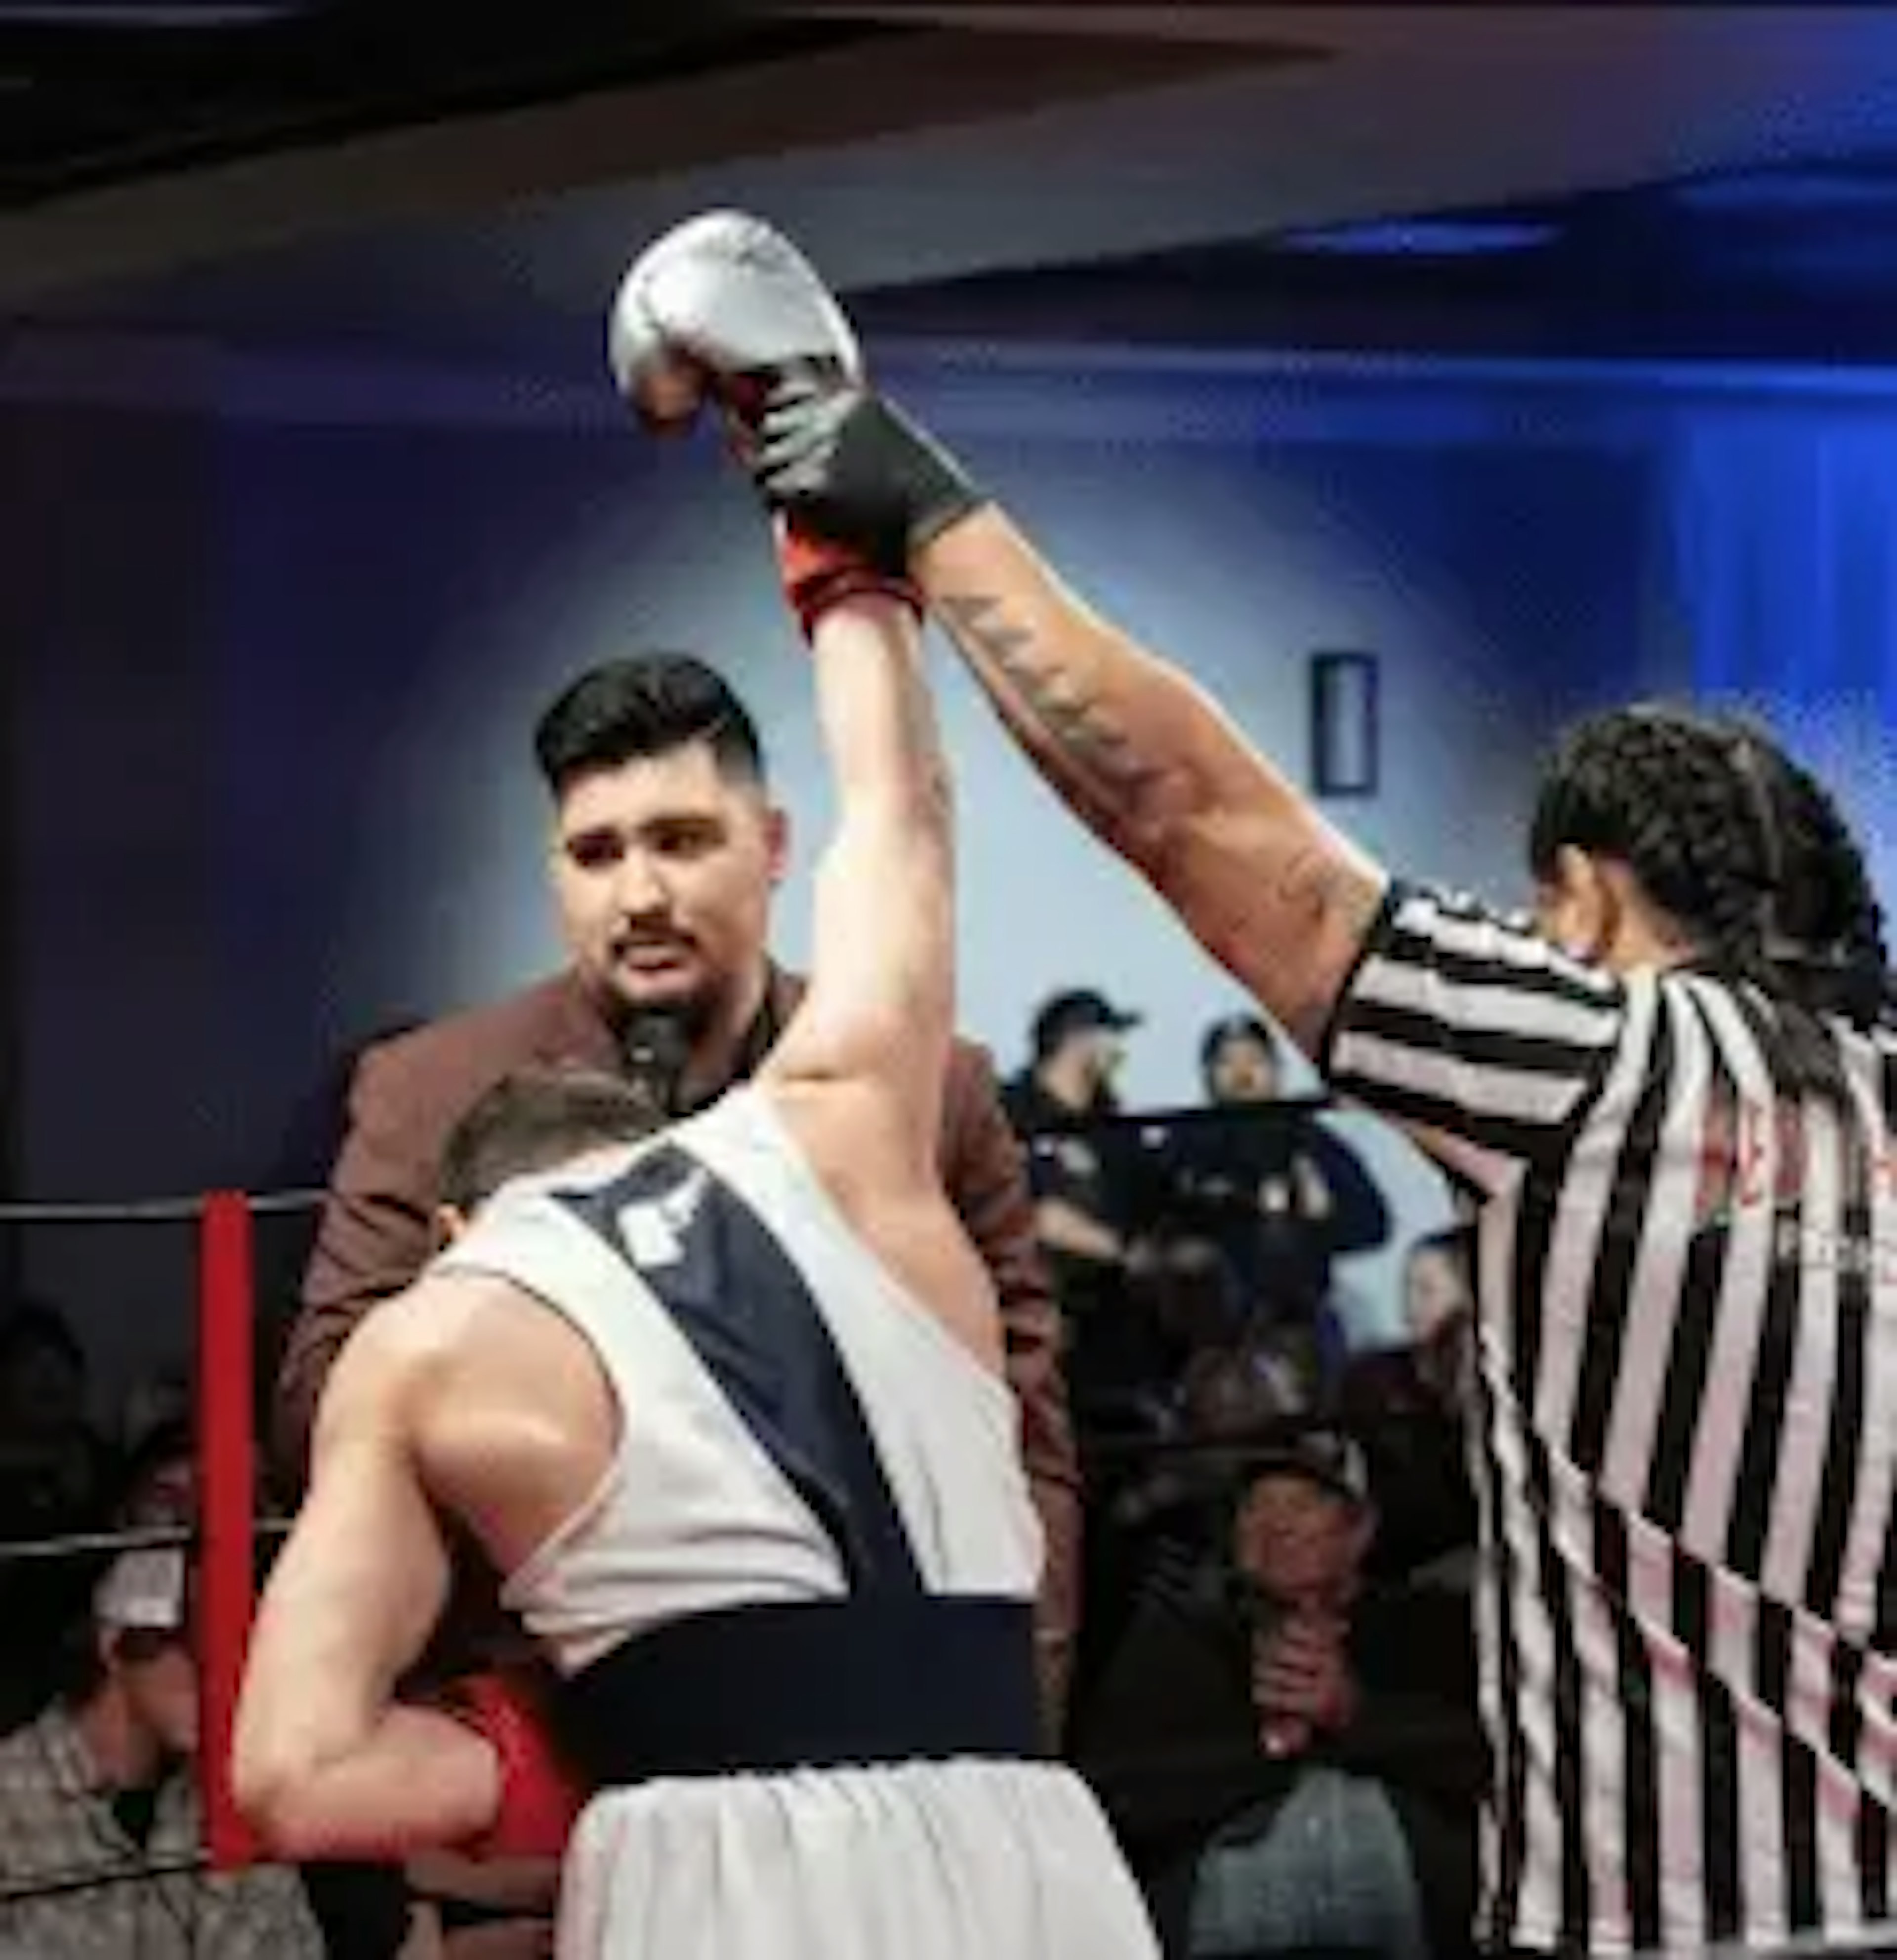 A boxer having his hand raised after a win.